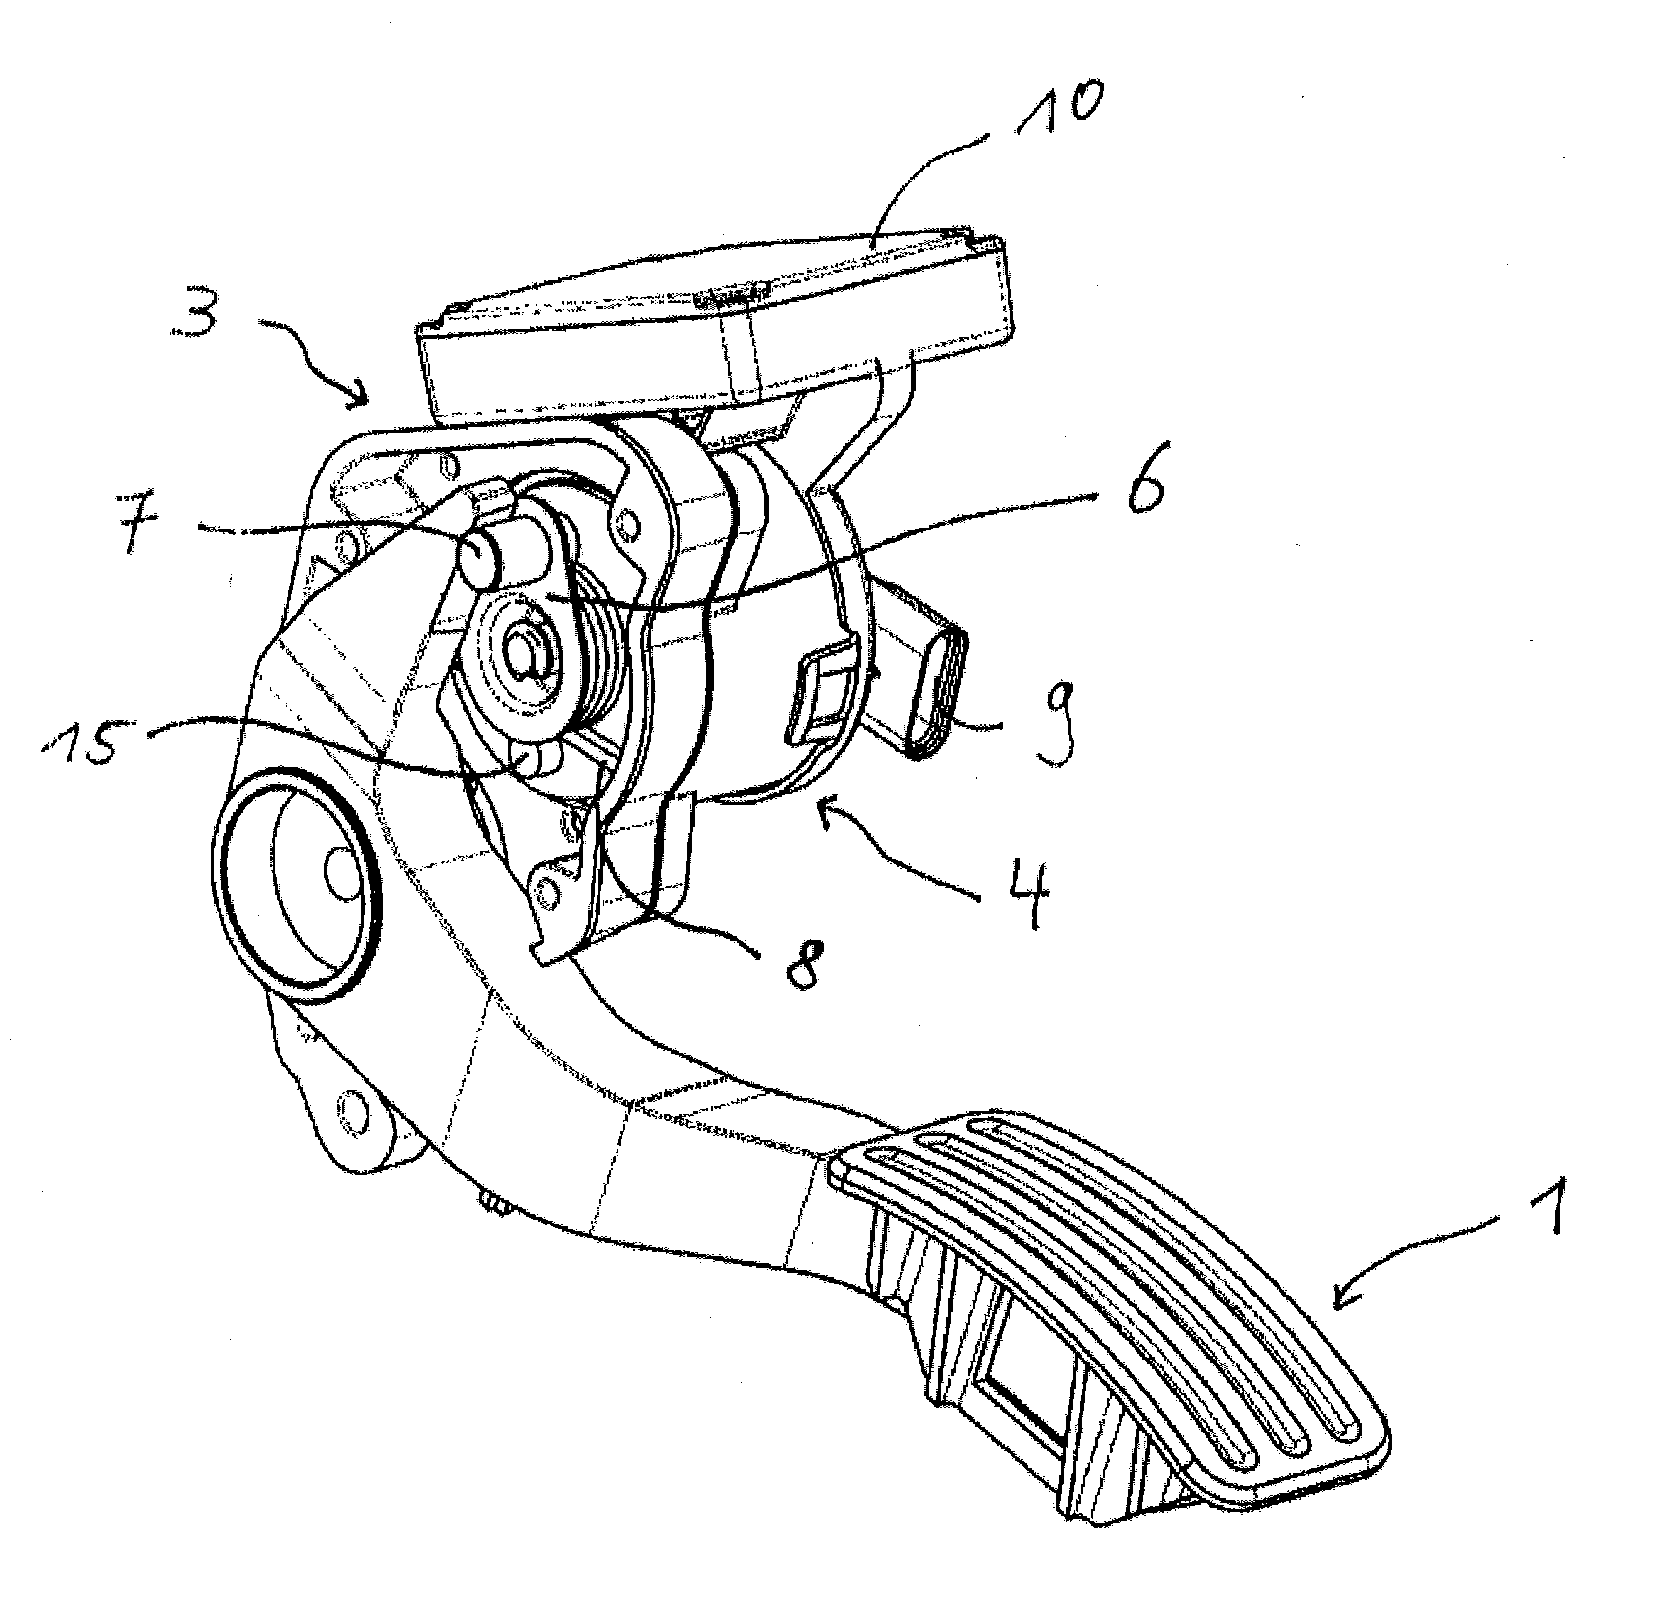 Compact pedal system for a motor vehicle